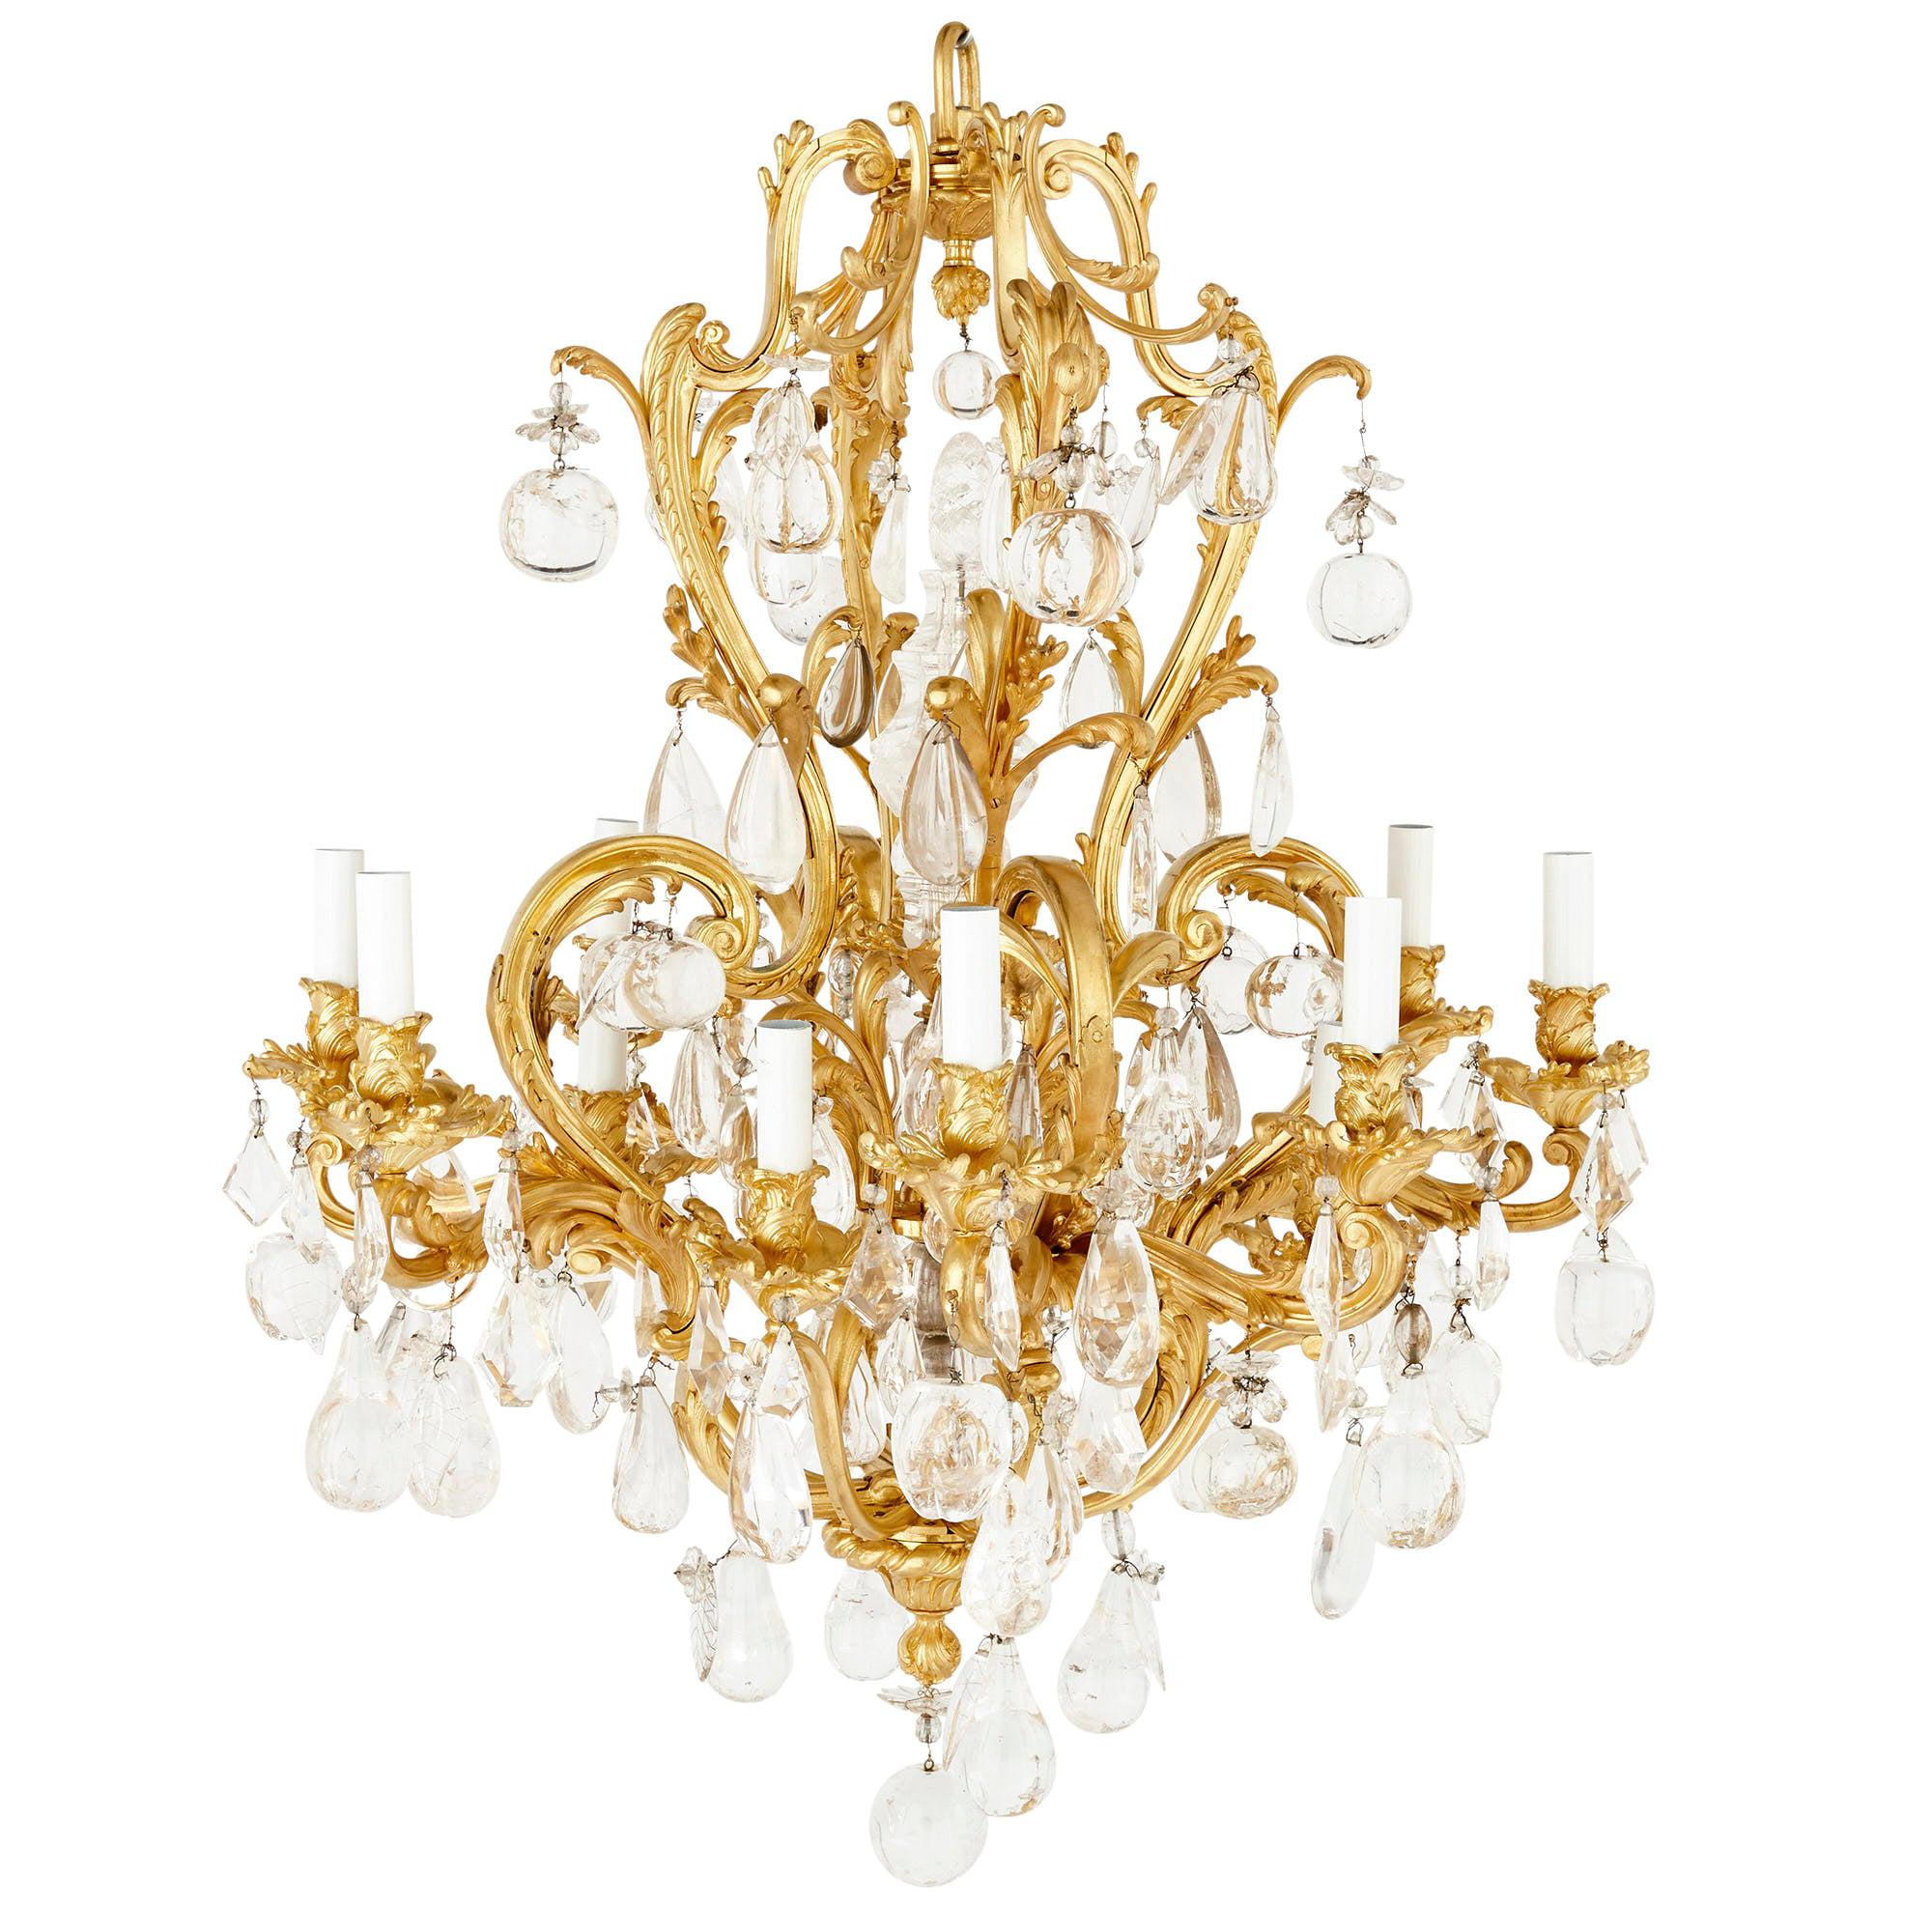 Antique Rococo Style Ormolu and Cut Glass Twelve-Light Chandelier For Sale